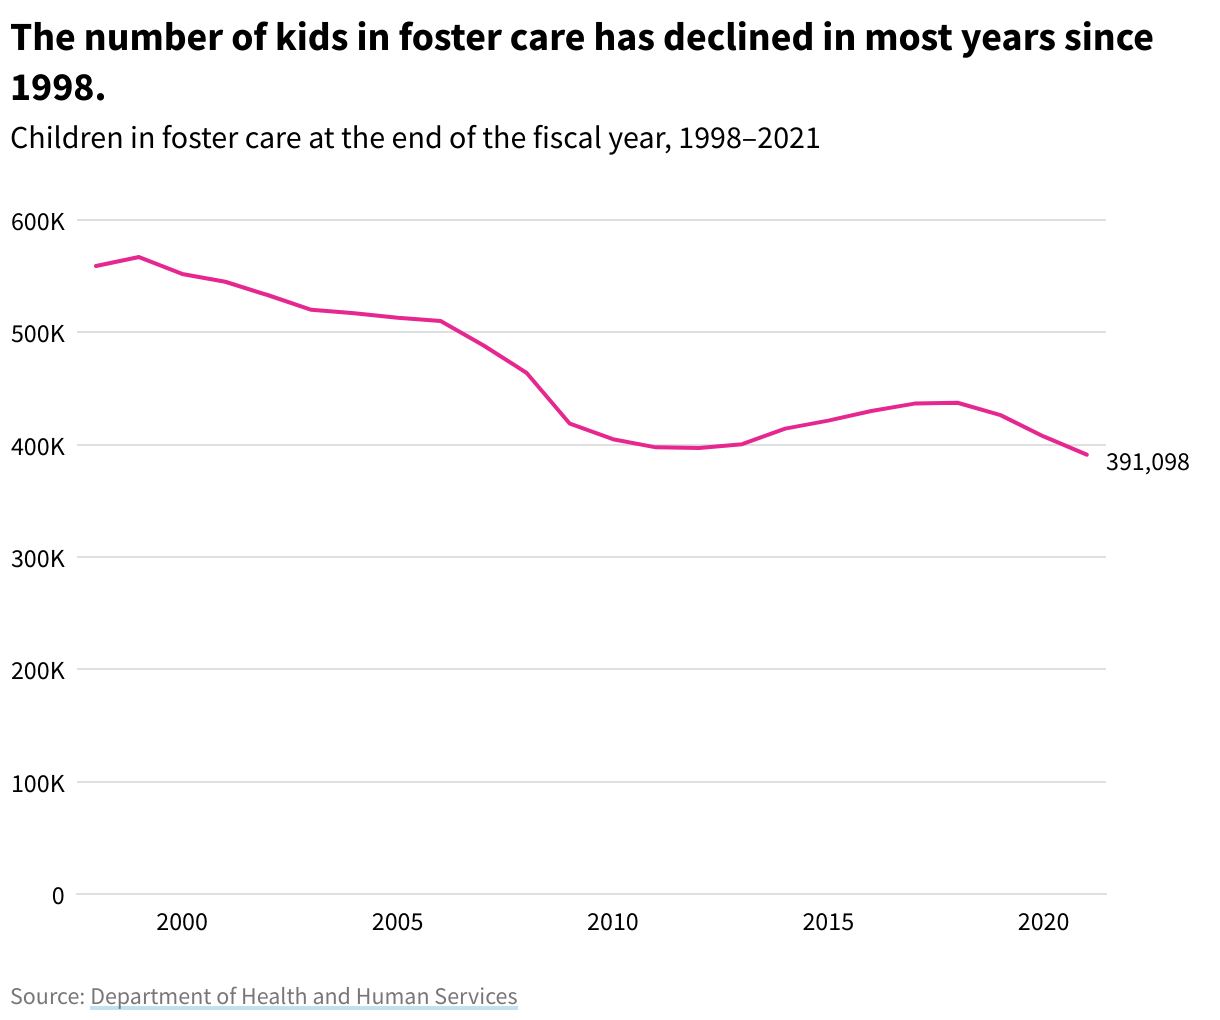 Line chart showing the number of children in foster care over time. 